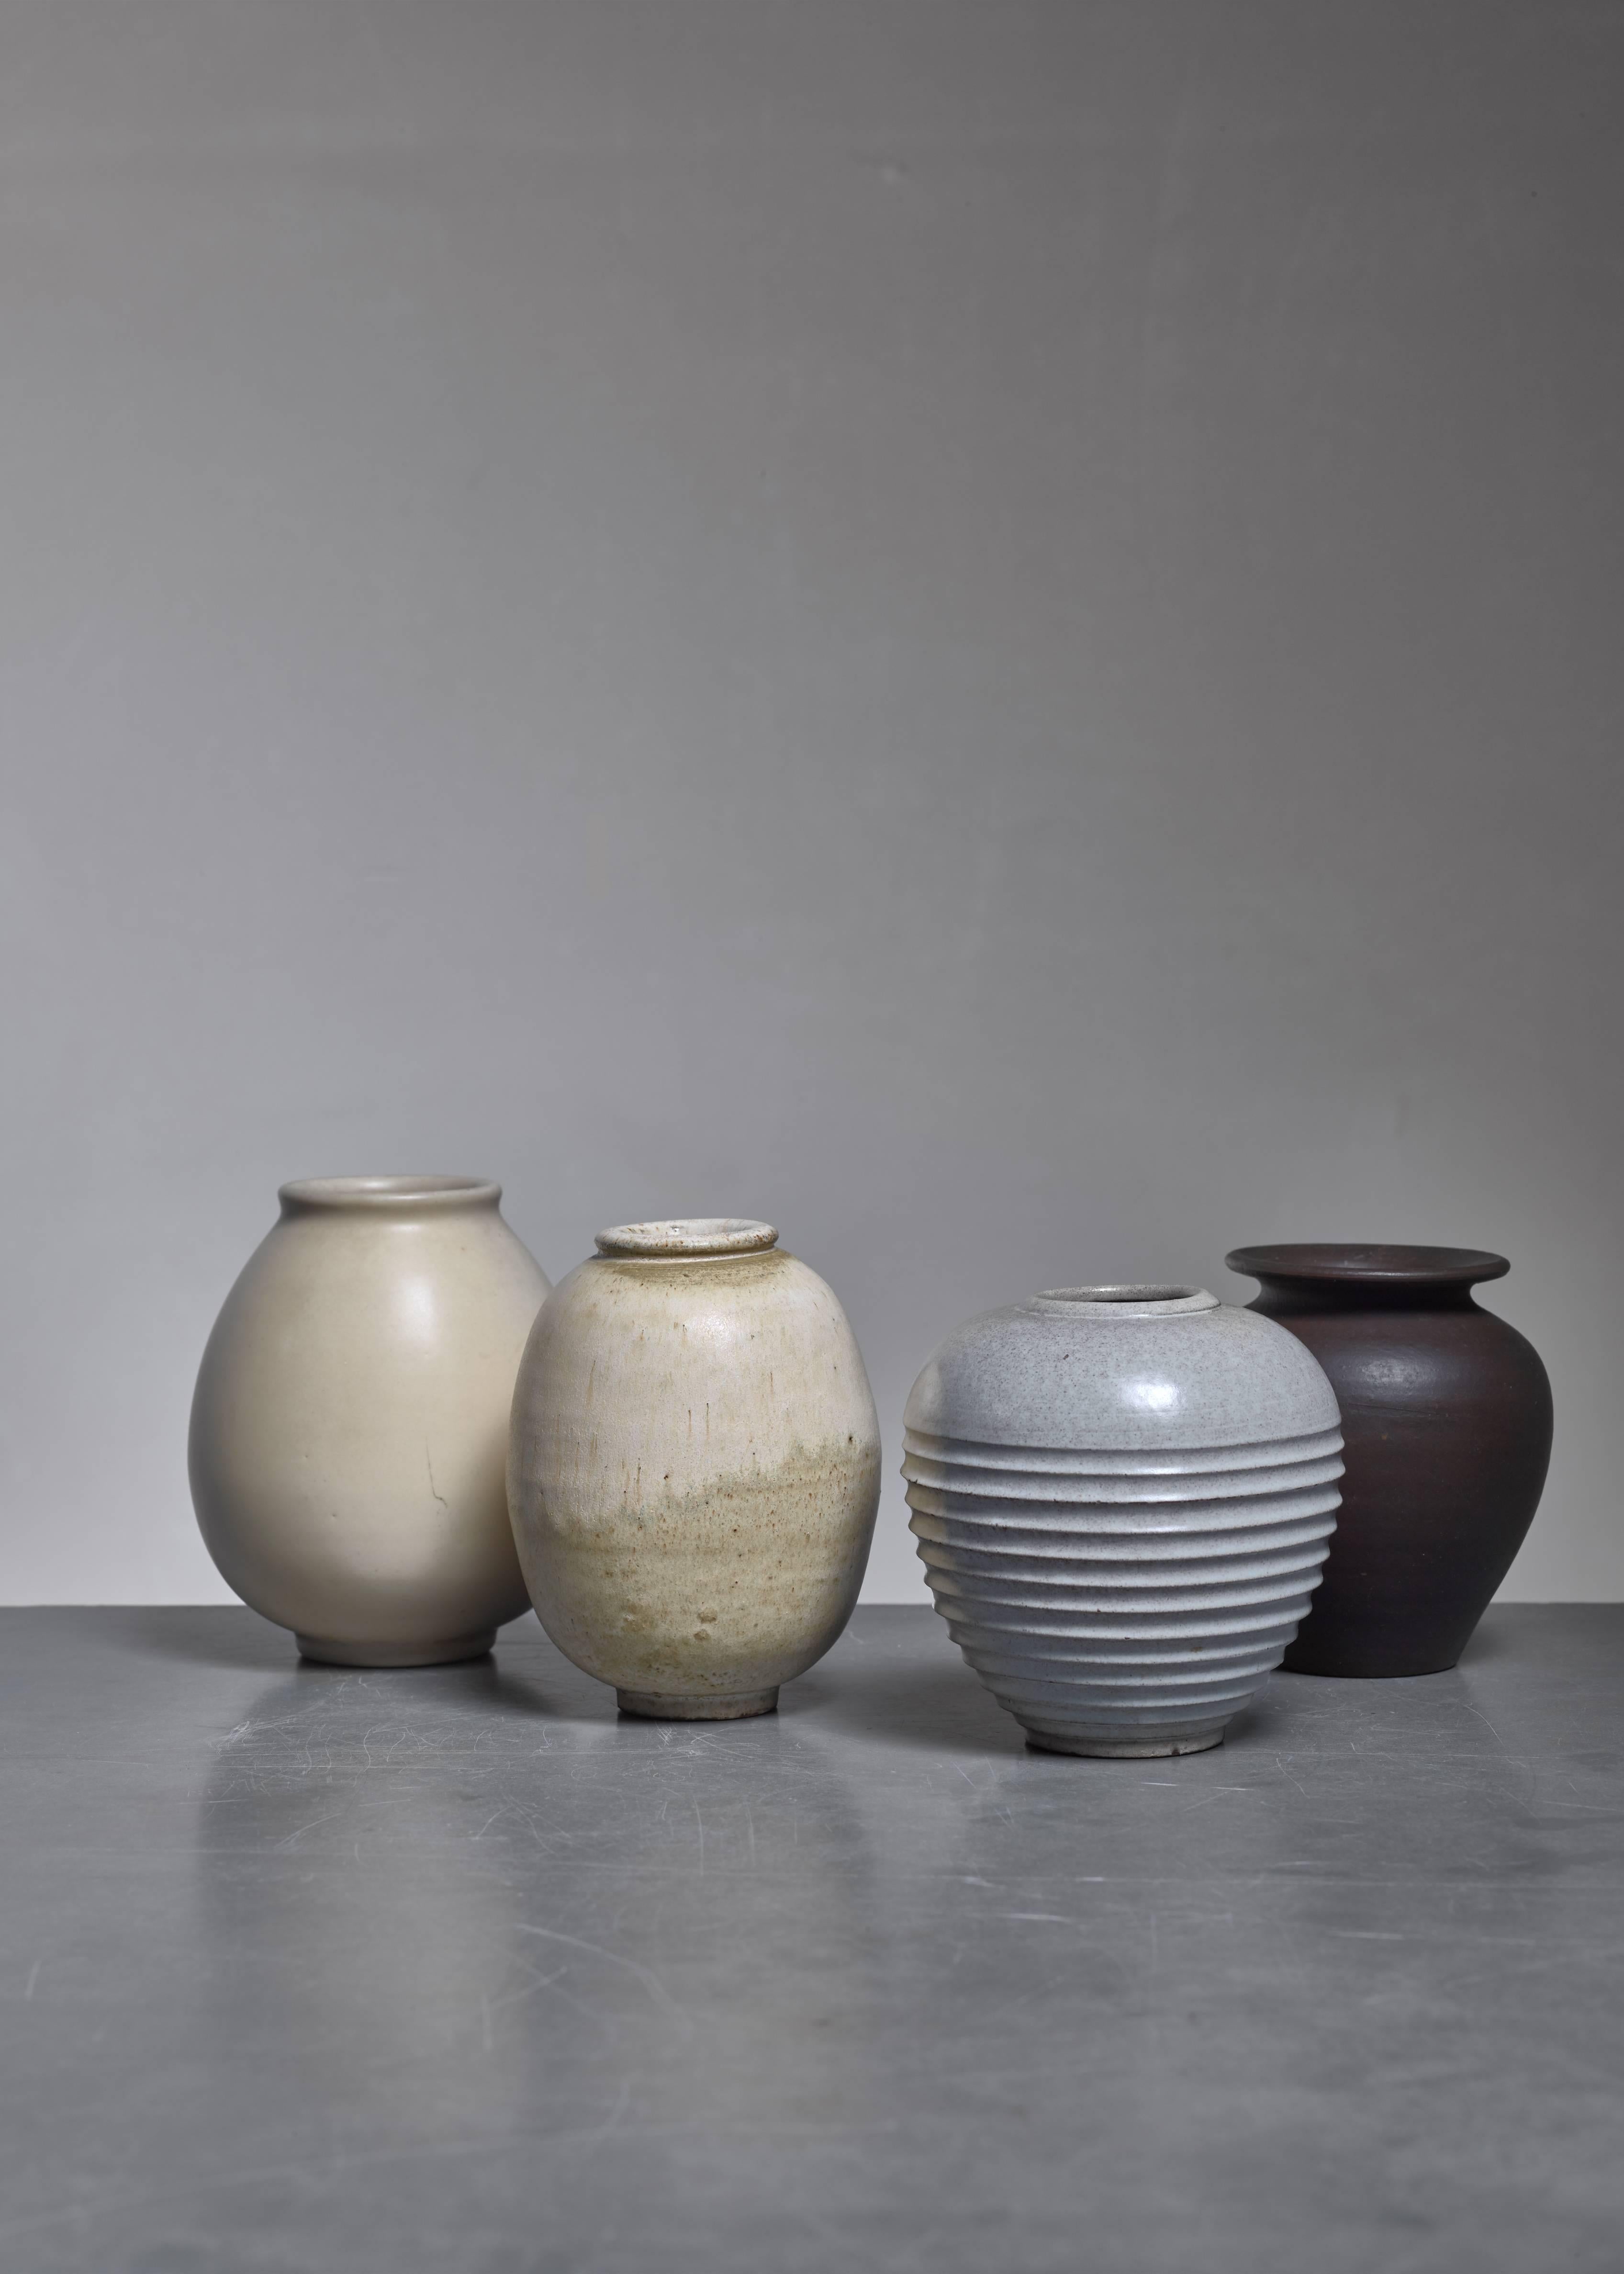 A set of four earthenware vases with light and dark glazing, by Jan Bontjes Van Beek. The height varies between 10 and 11.5 cm.
Three vases are marked by Bontjes and one by Alfred Ungewiss (where Bontjes worked from 1950 to 1953).
Jan Bontjes Van